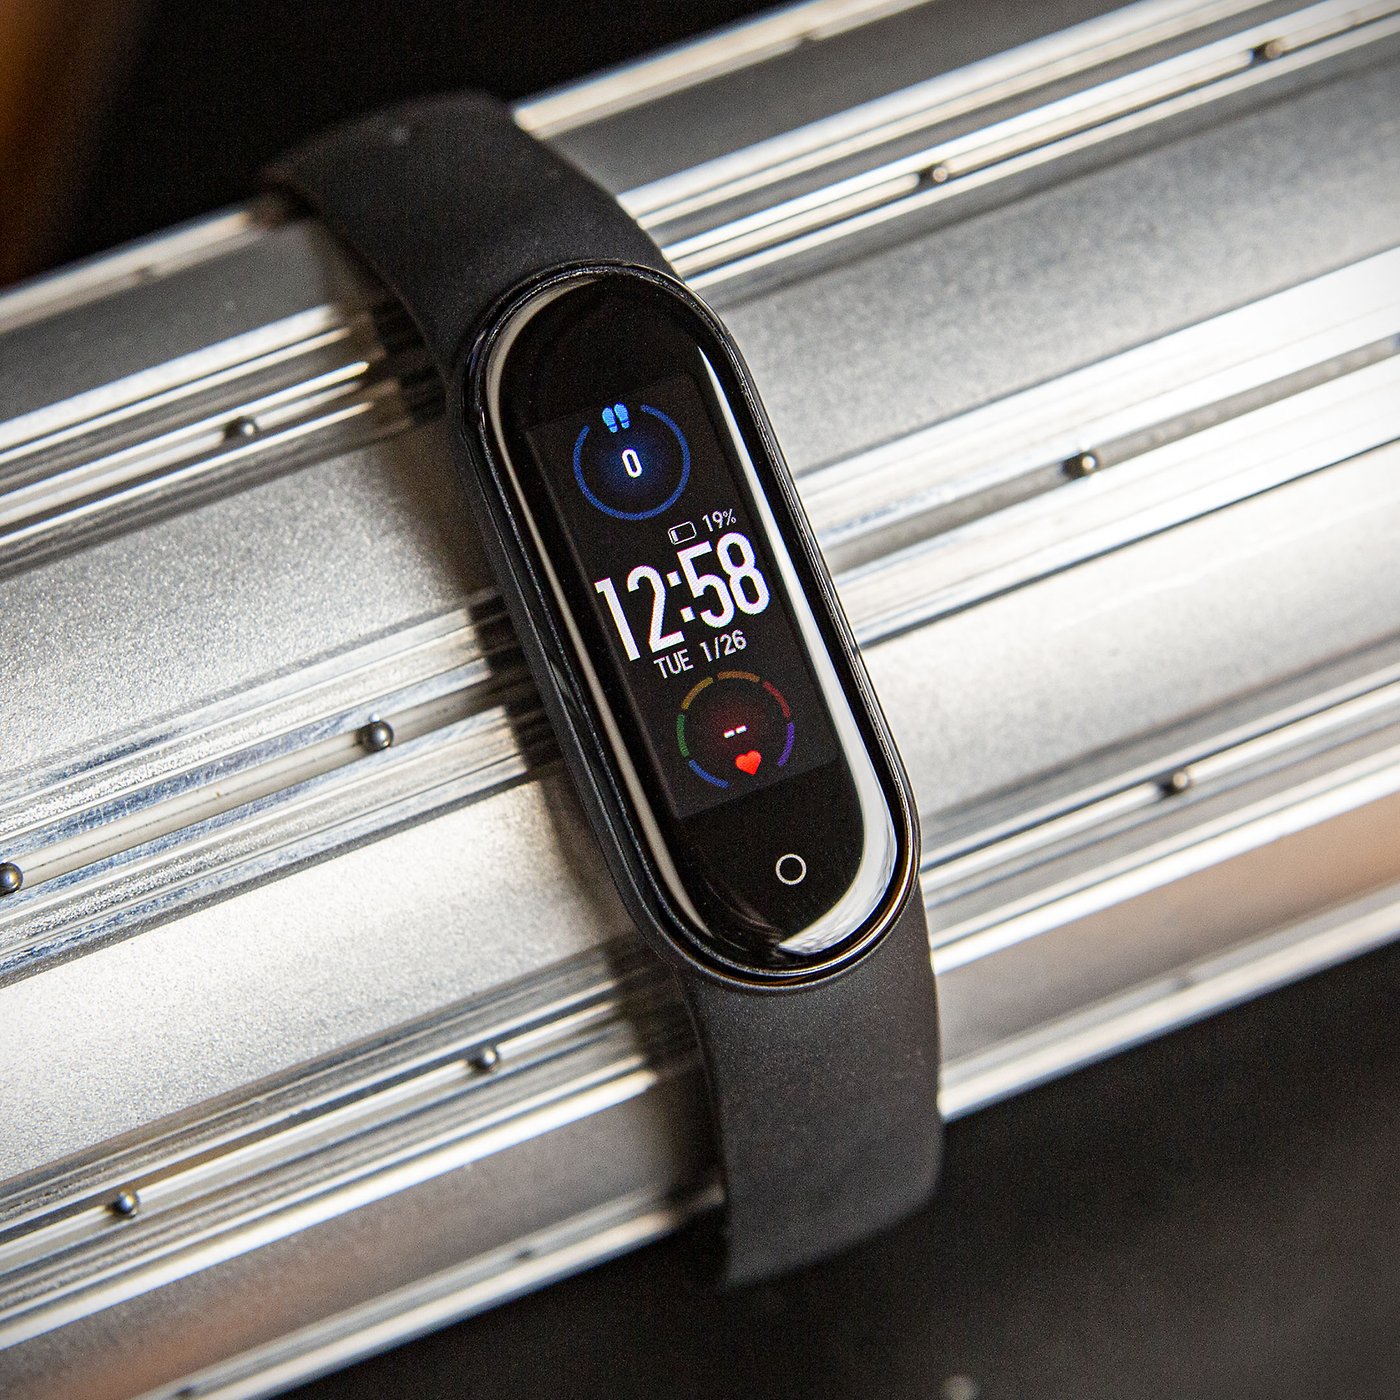 Xiaomi Mi Band 5 Review: Fixing all the quirks from the Mi Band 4